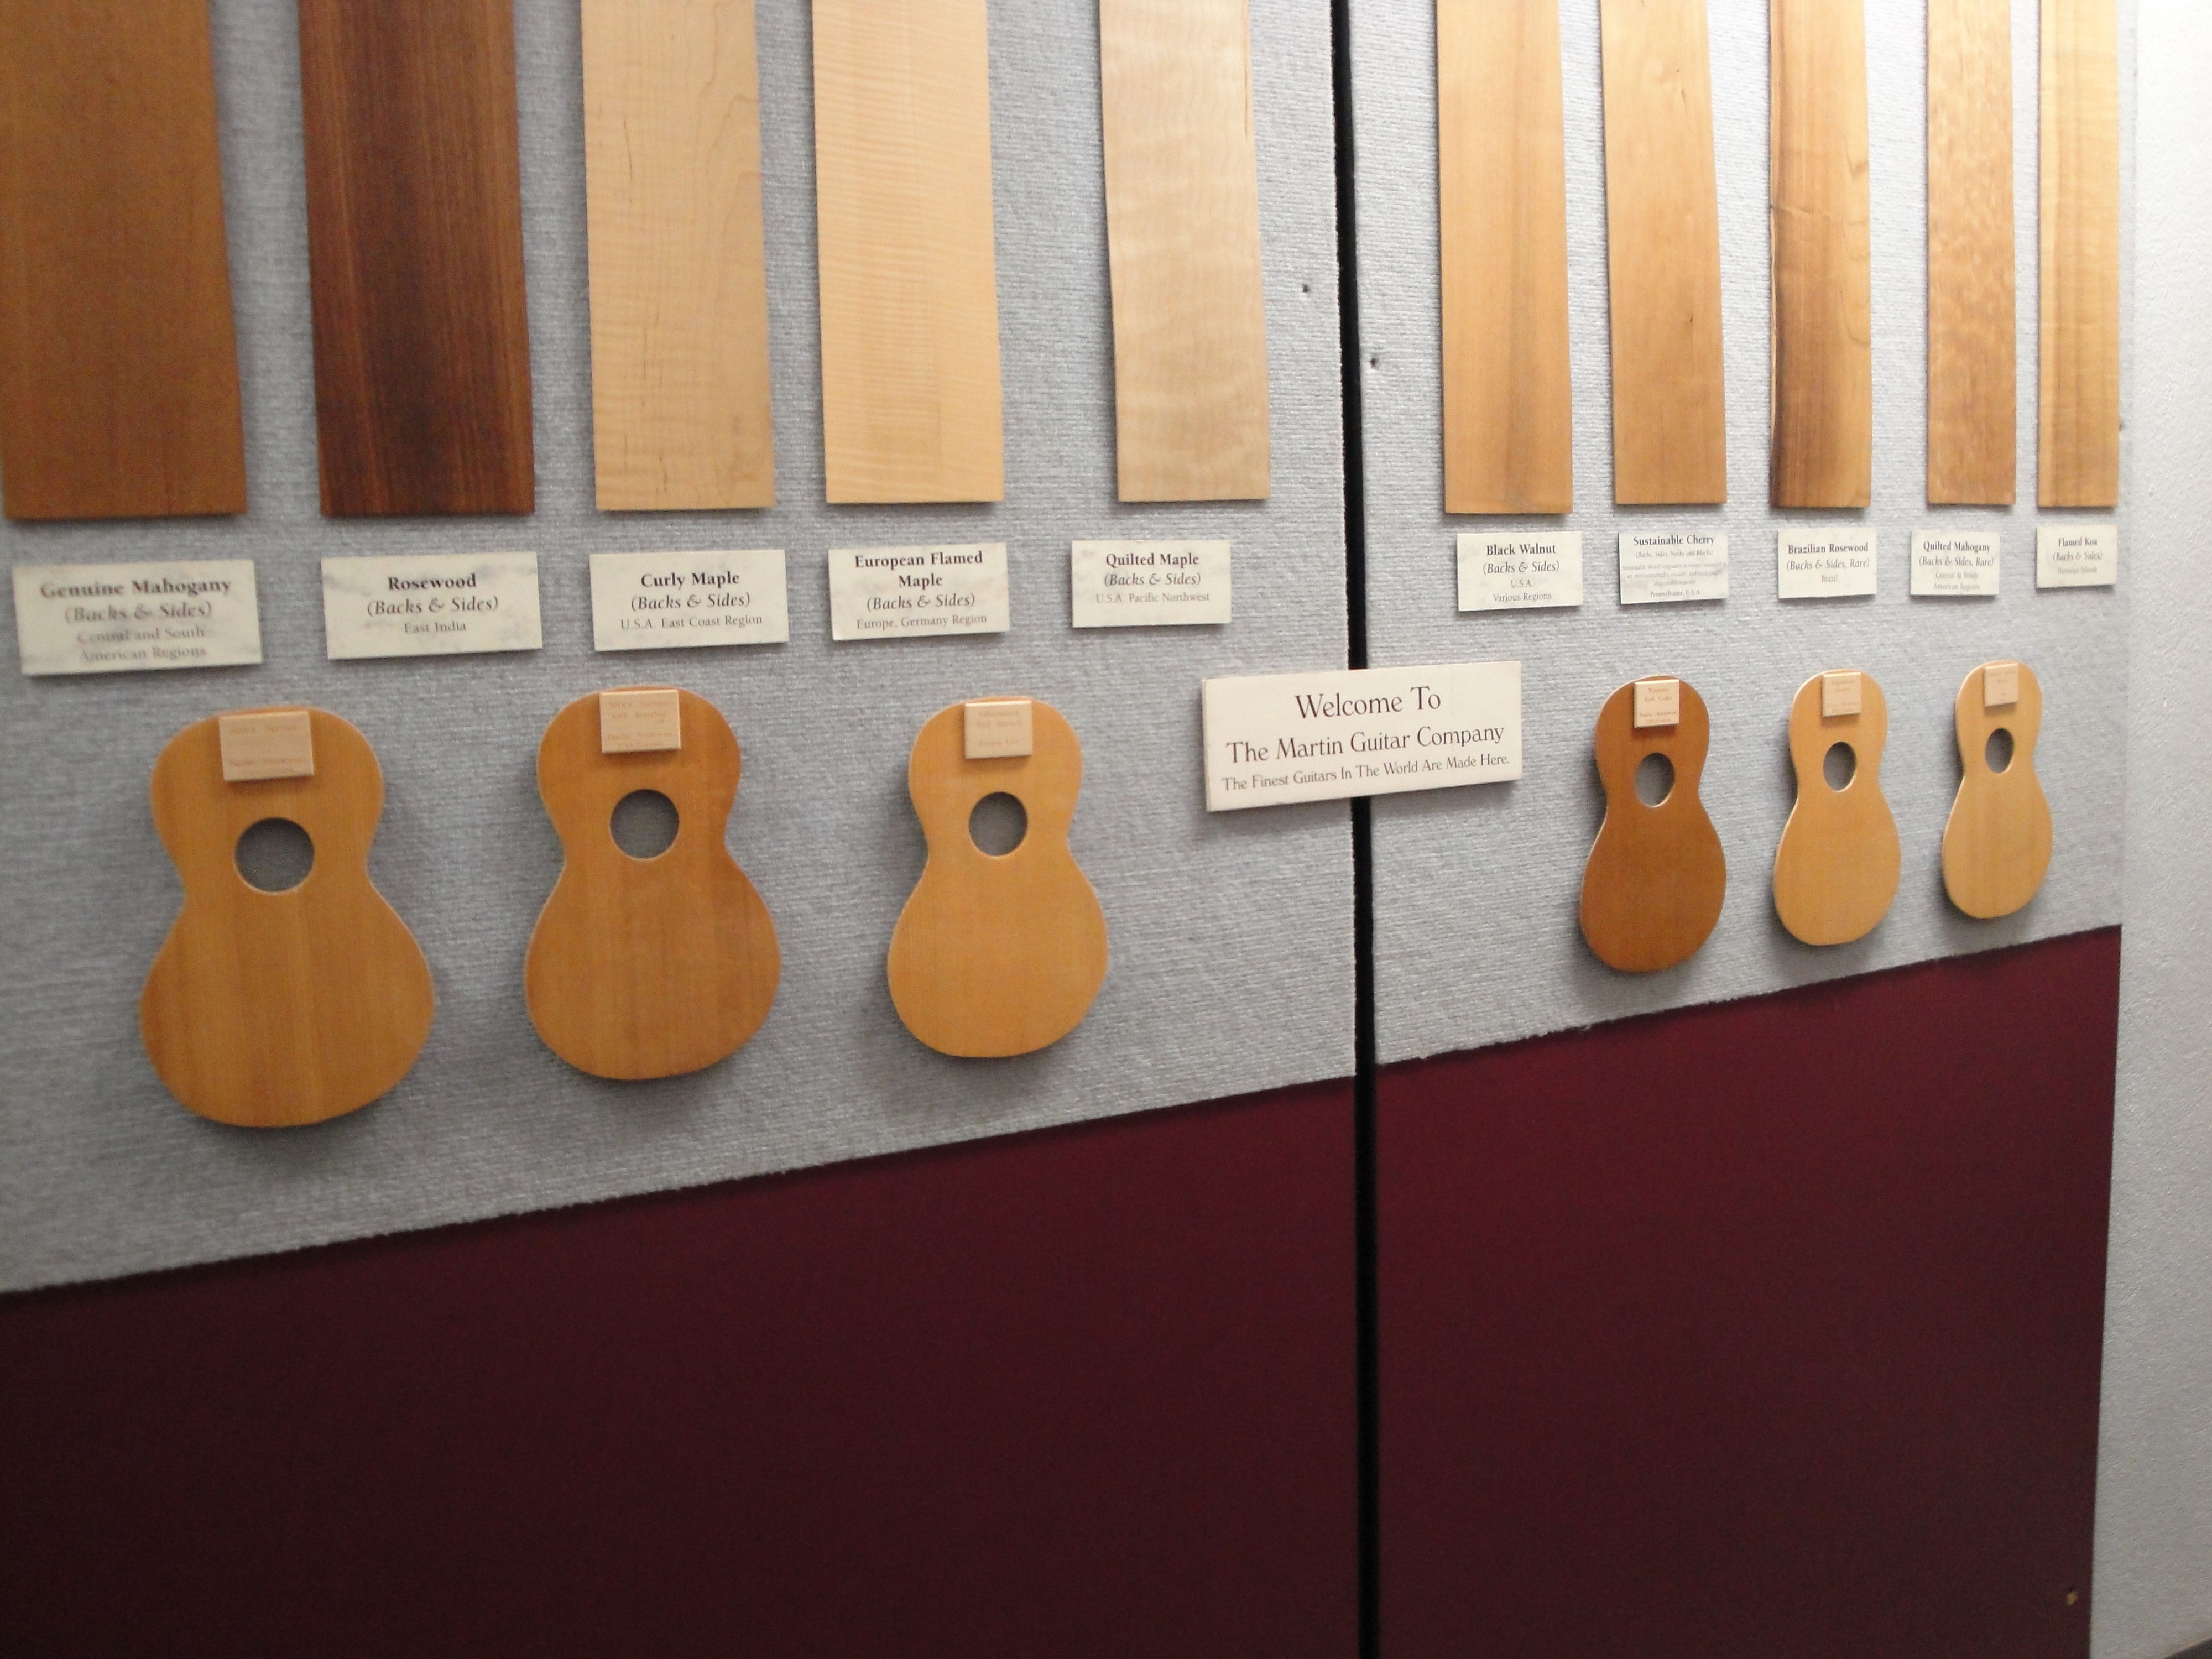 Wood display at the C.F. Martin Guitar Factory in Pennsylvania. The “Quilted Maple” panel is cut from a bigleaf maple tree. Photo by Alex Harden/Flickr